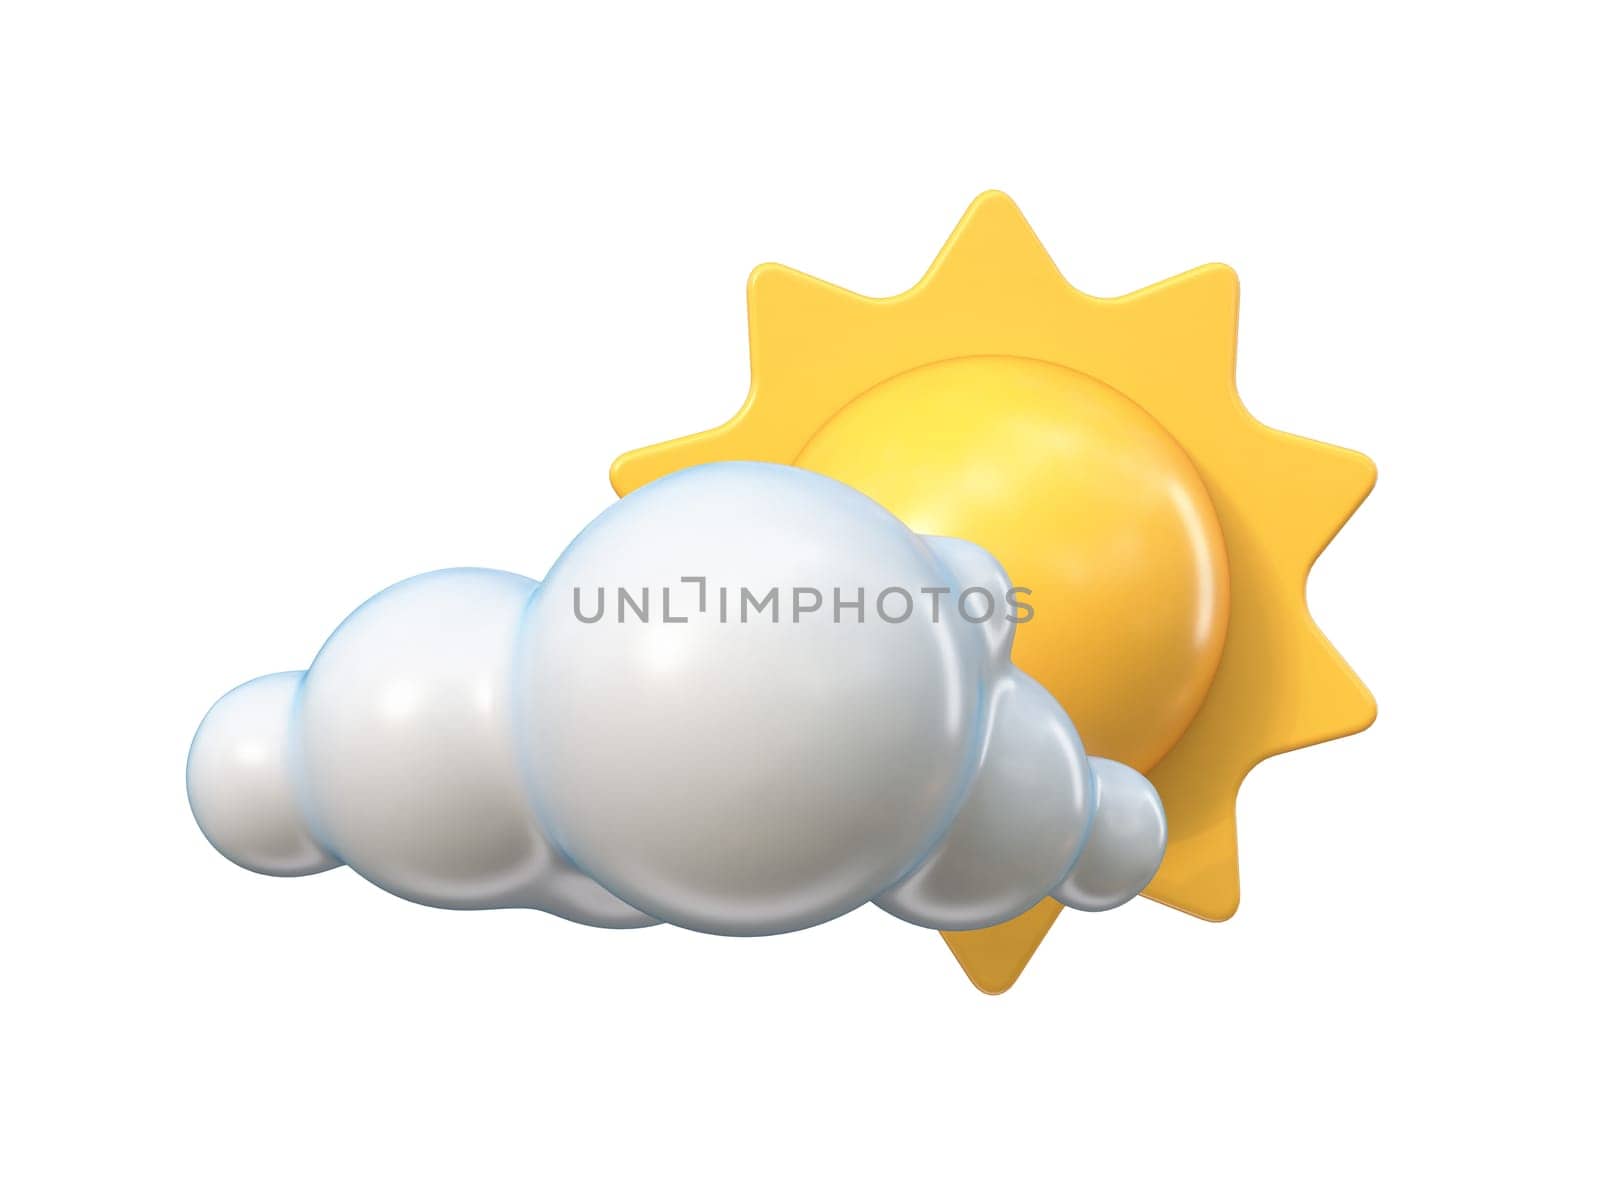 Weather icon Partly cloudy 3D rendering illustration isolated on white background